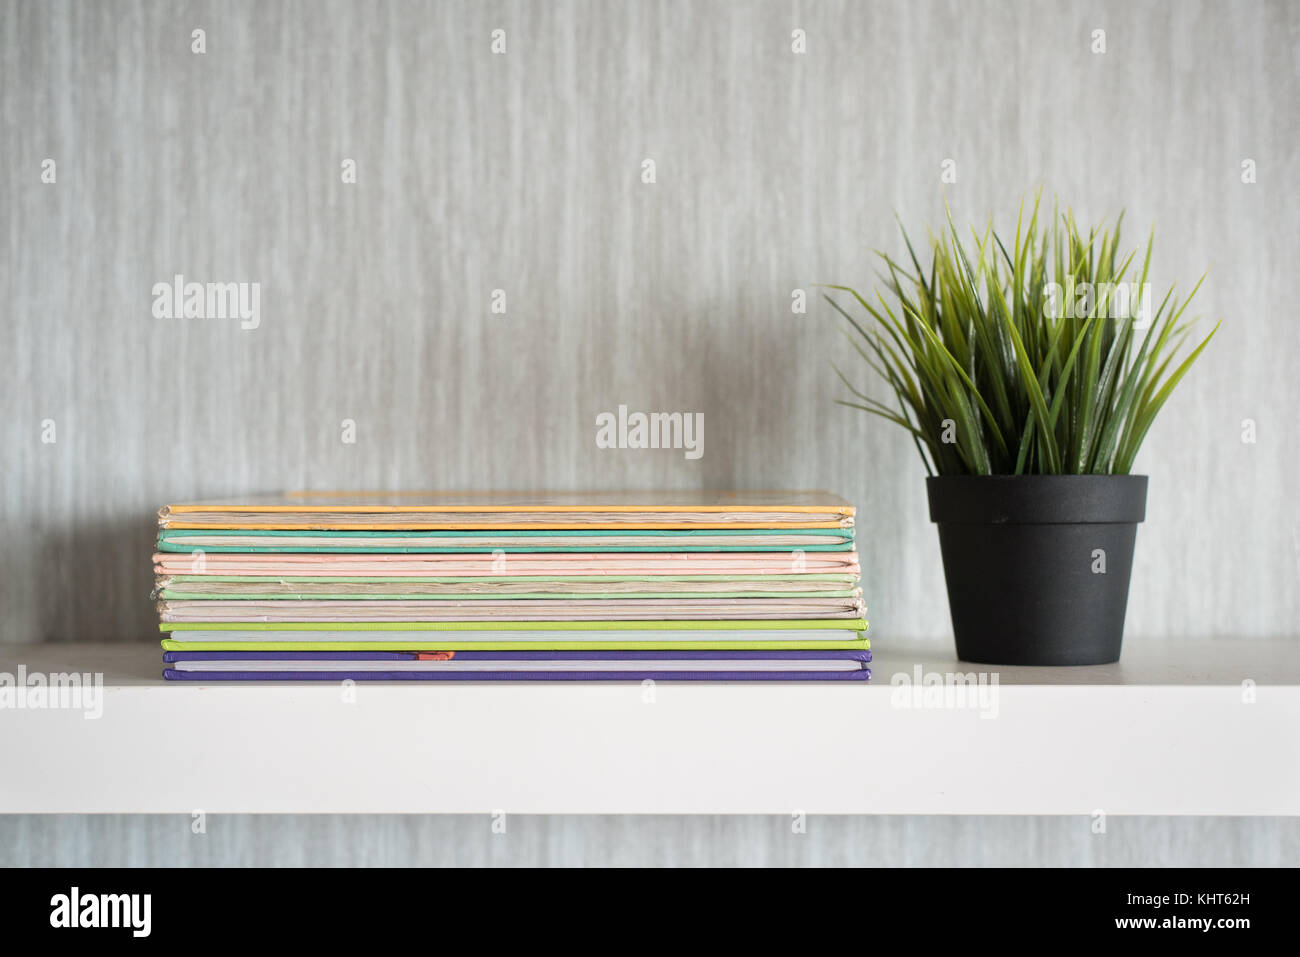 encyclopedia books on white shelf with plant in a vase - organized concept Stock Photo